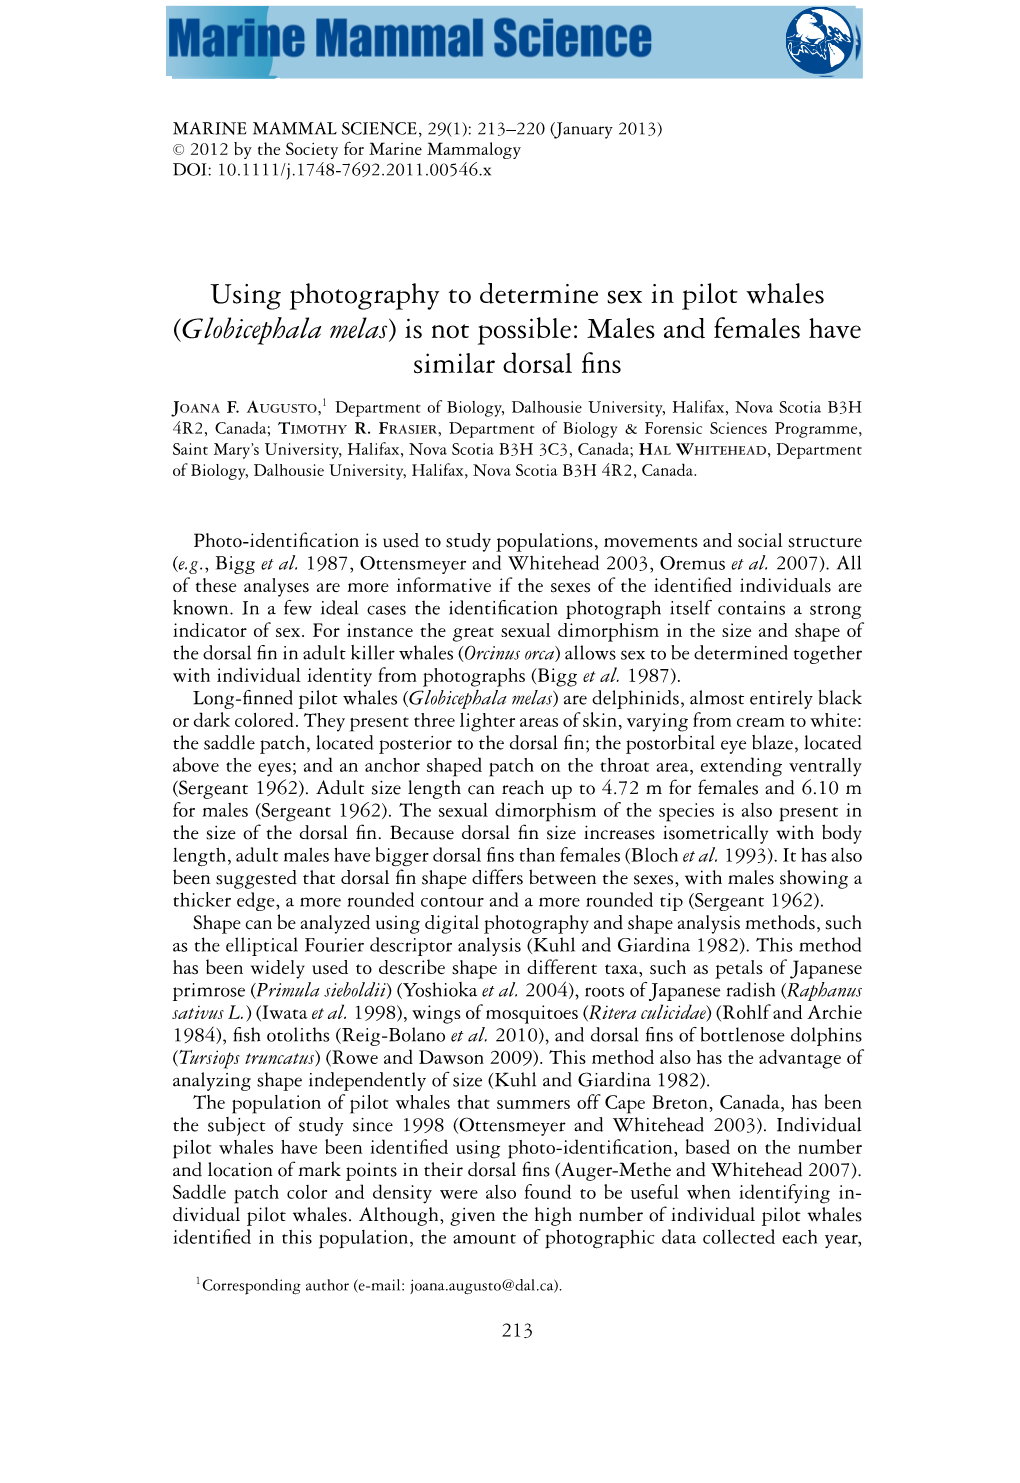 Using Photography to Determine Sex in Pilot Whales (Globicephala Melas) Is Not Possible: Males and Females Have Similar Dorsal F